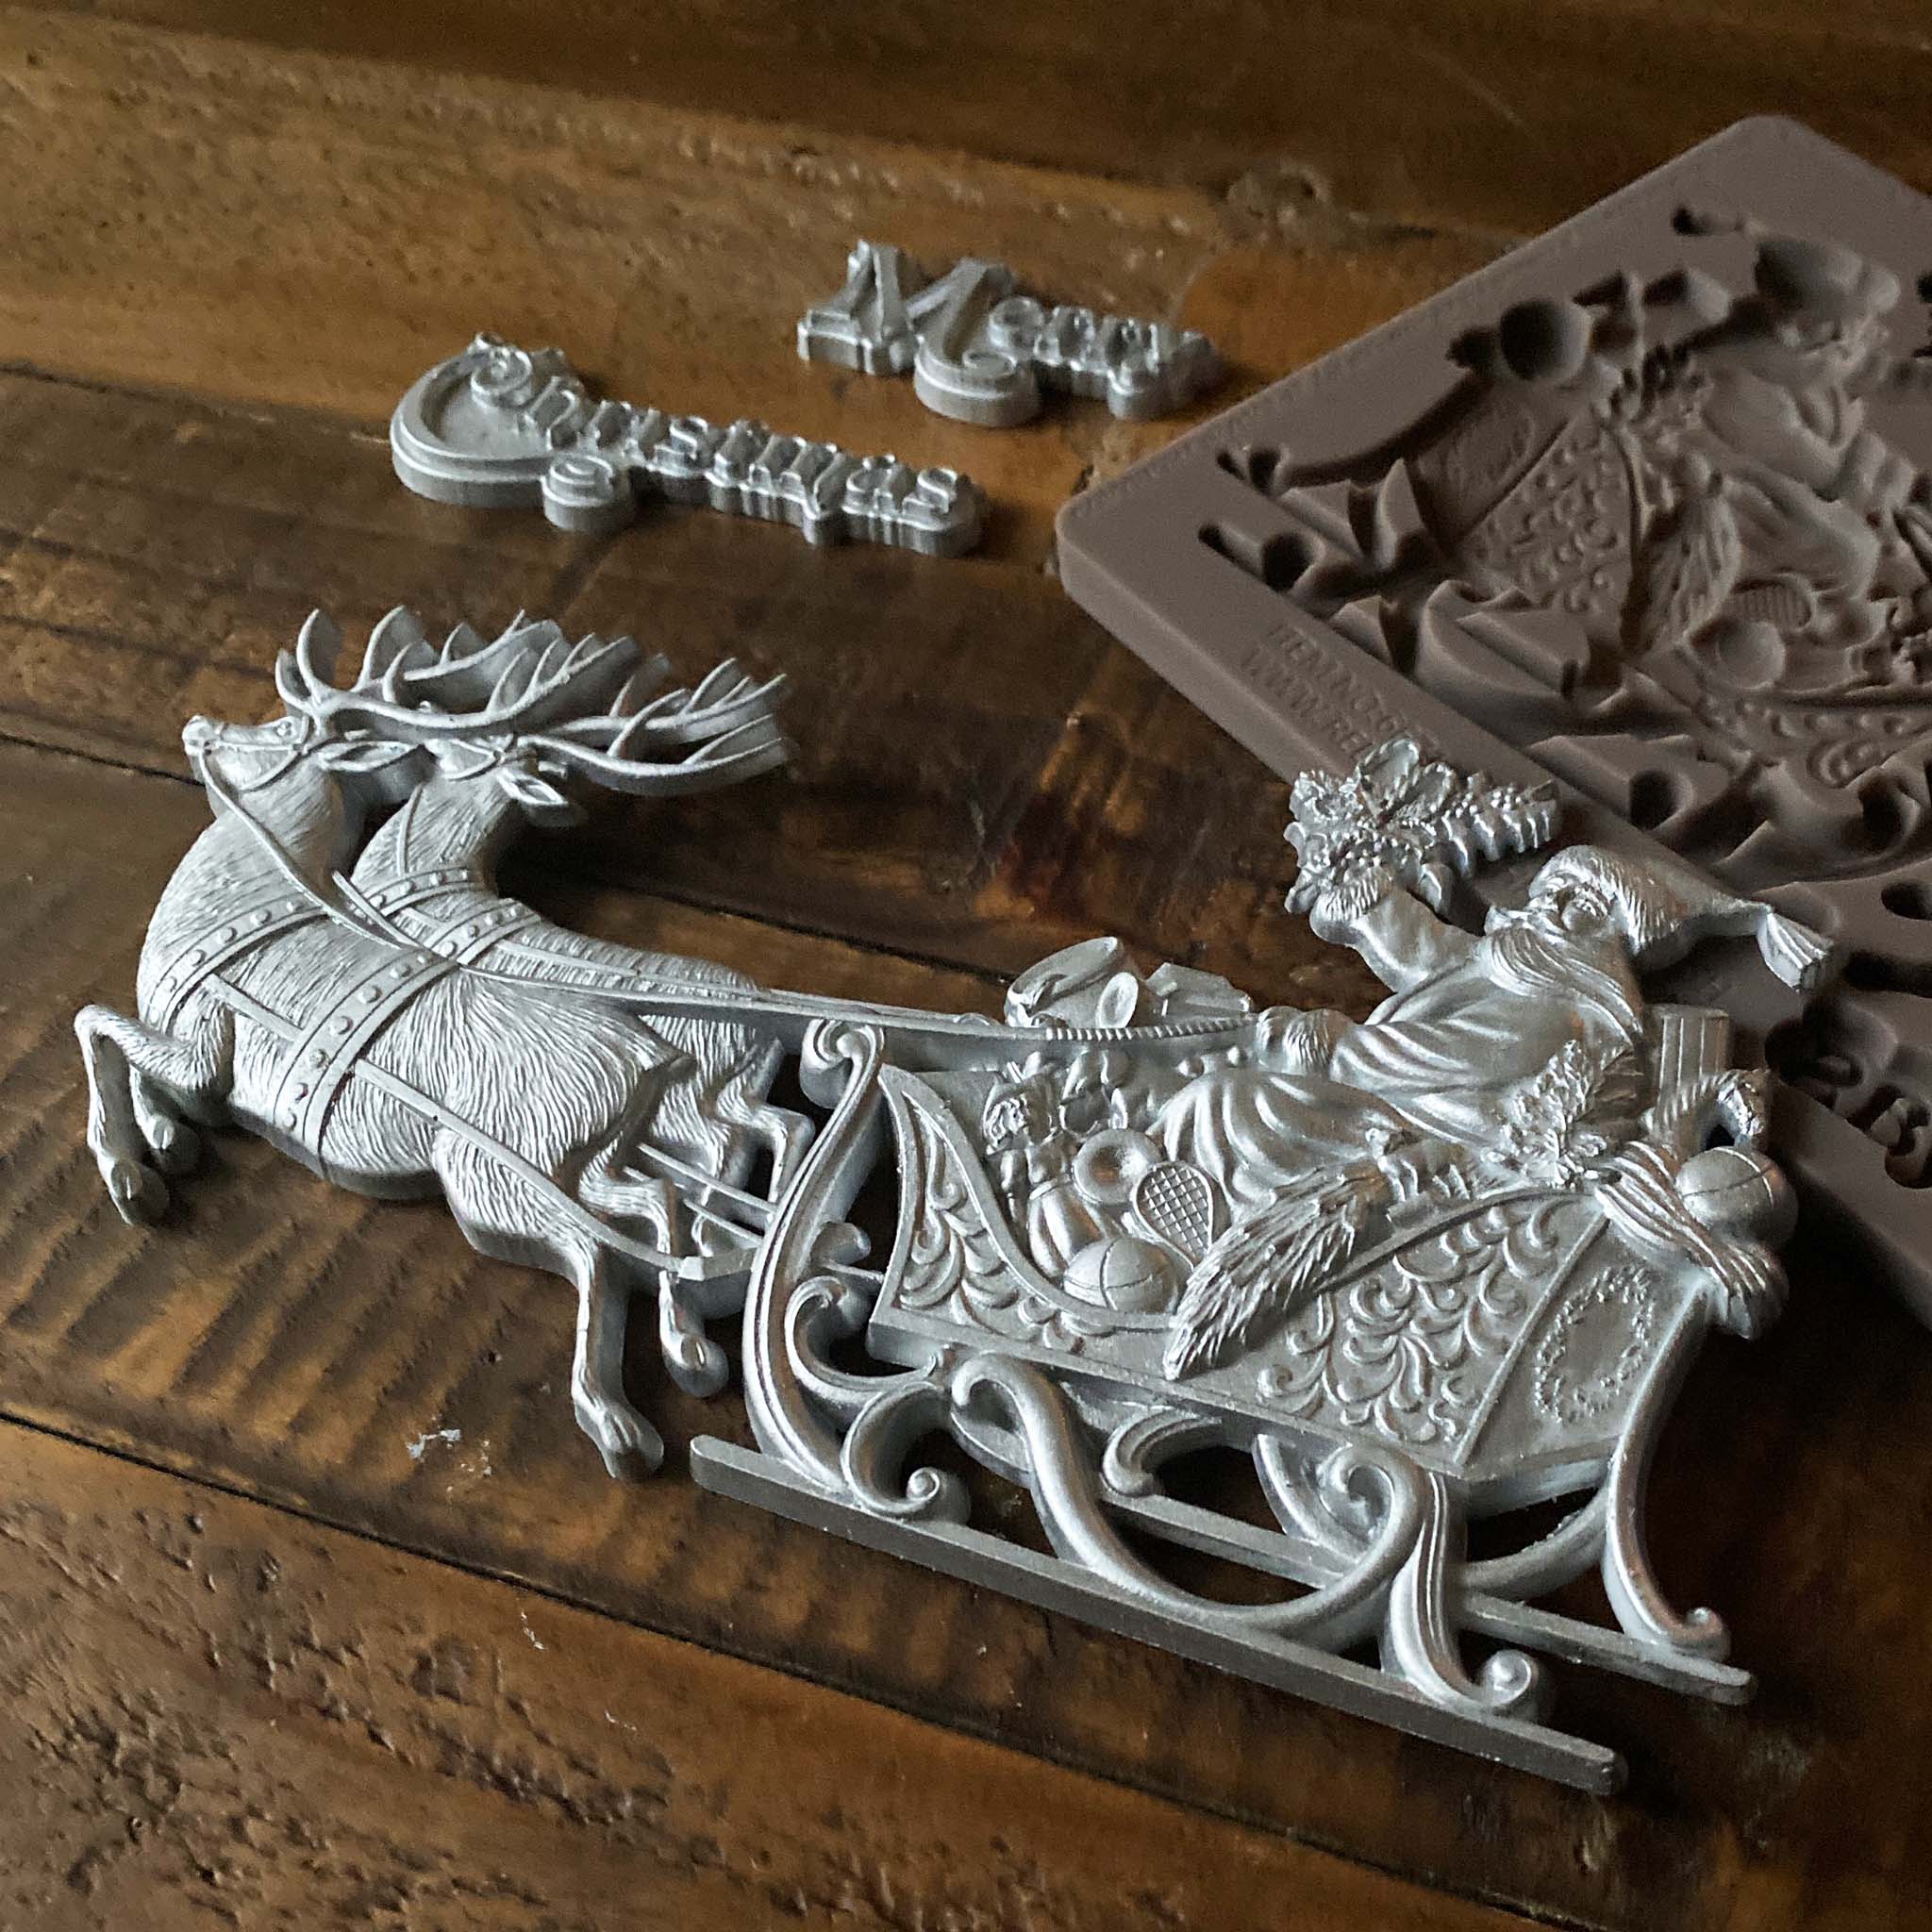 Silver colored castings of ReDesign with Prima's Santa's Sleigh sit on their brown silicone mould against a dark wood background.